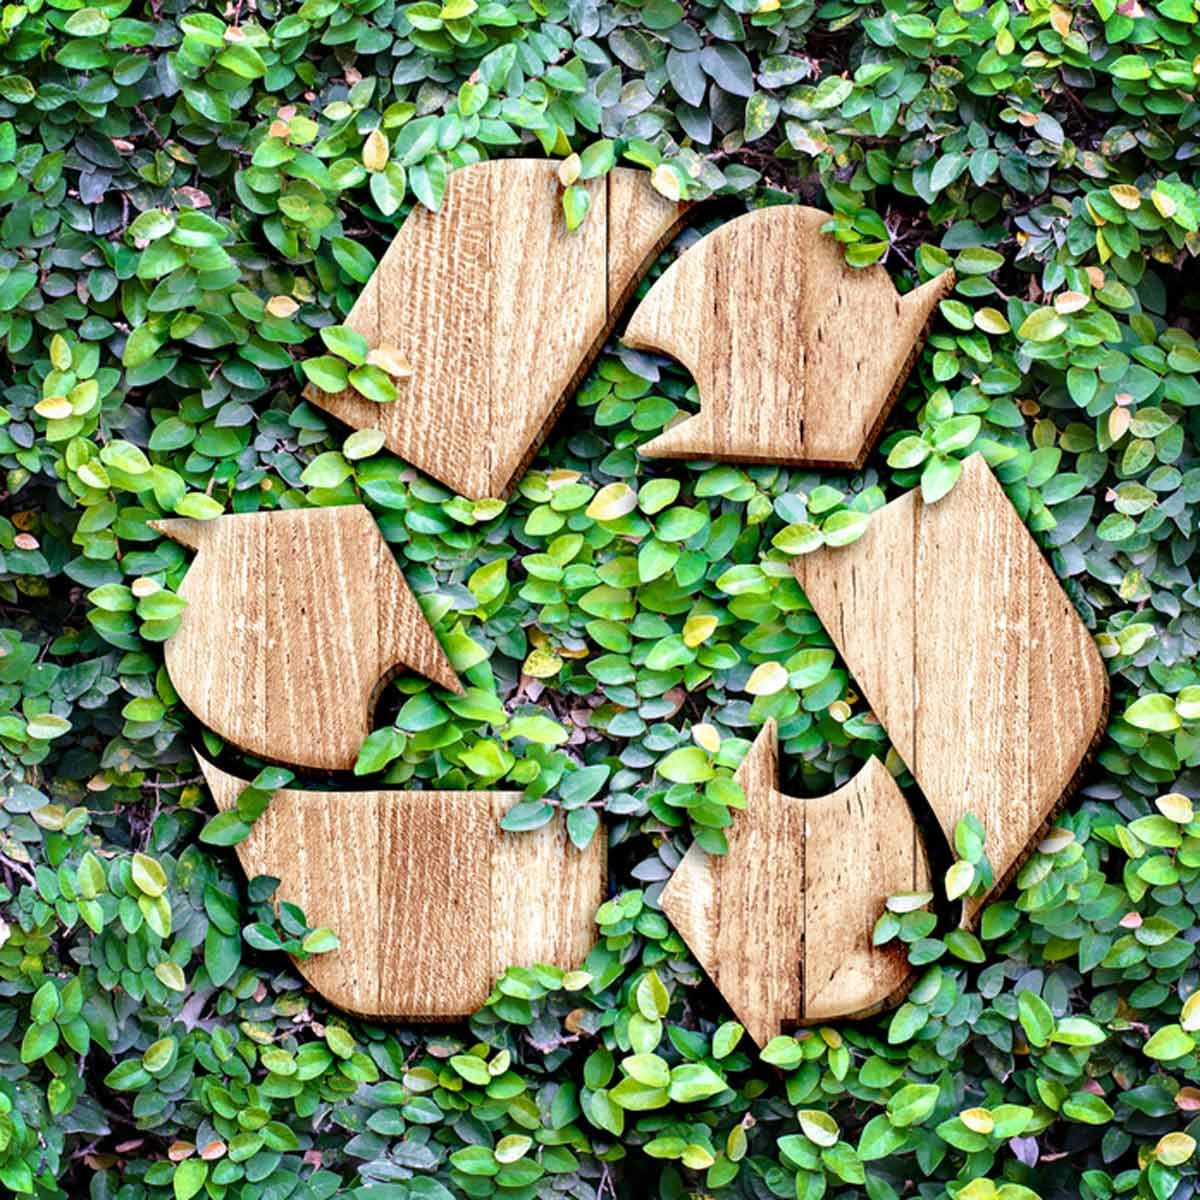 10 Ways to Live More Waste-Free